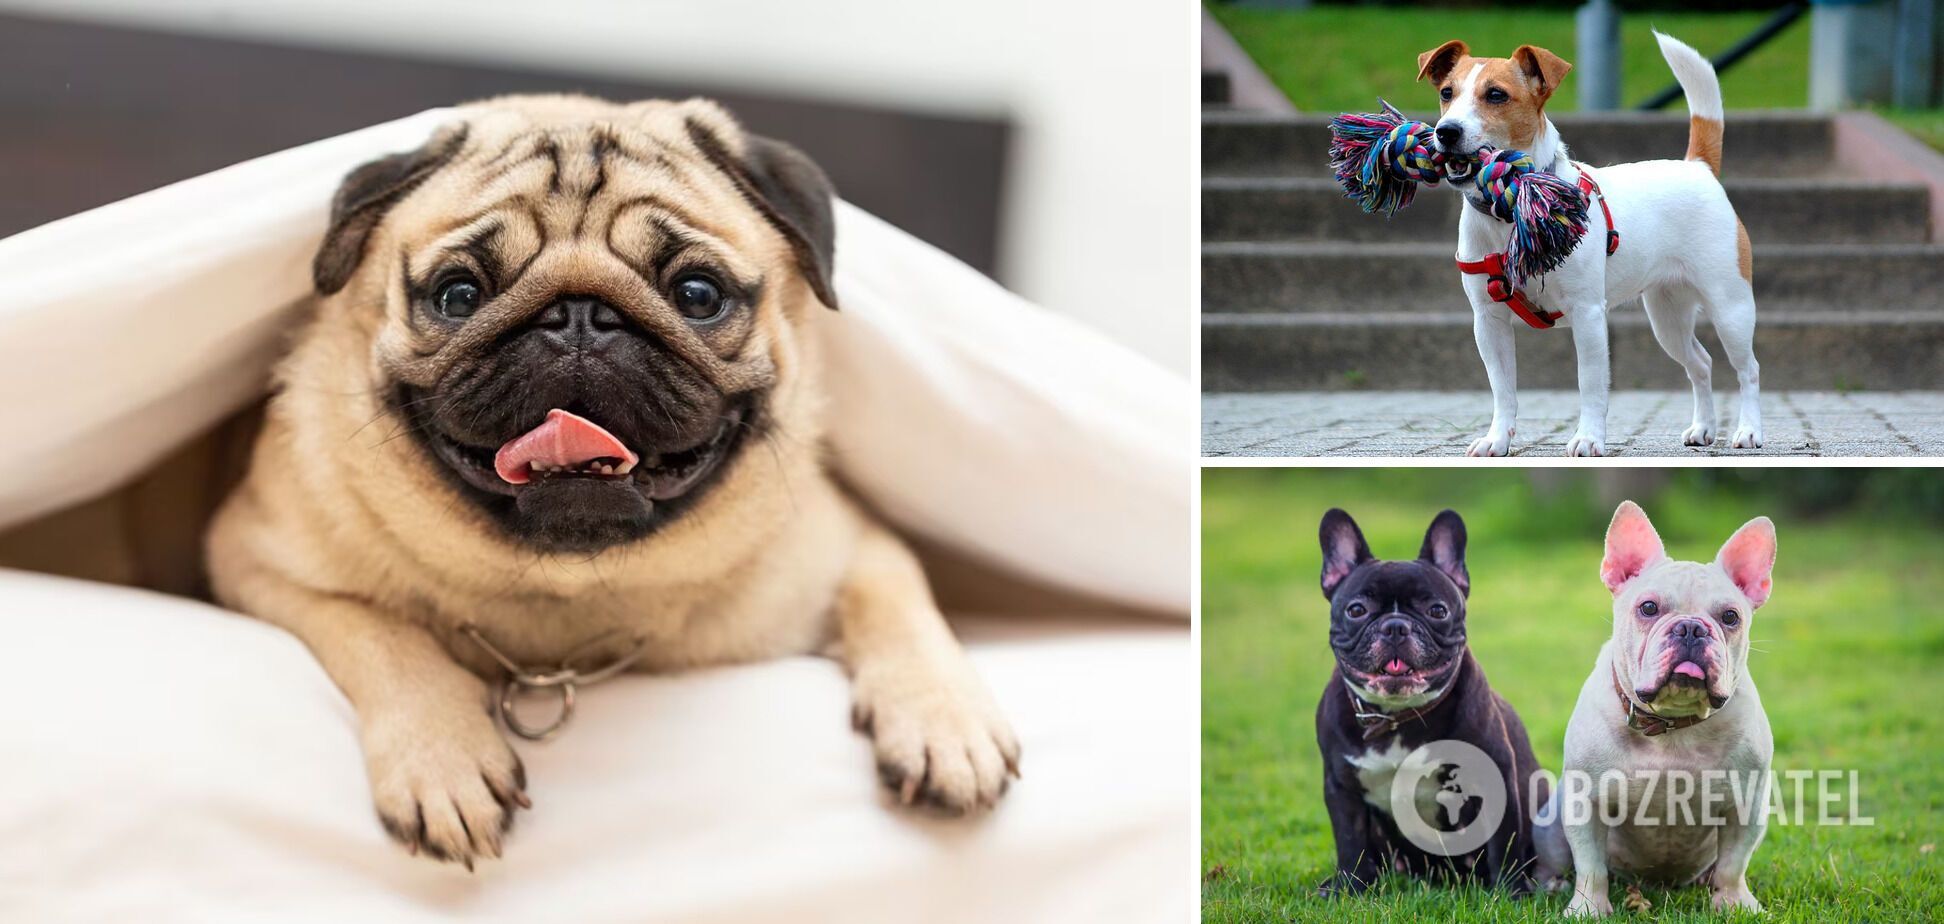 They're loved by everyone: Which dog breeds are the most popular in the world